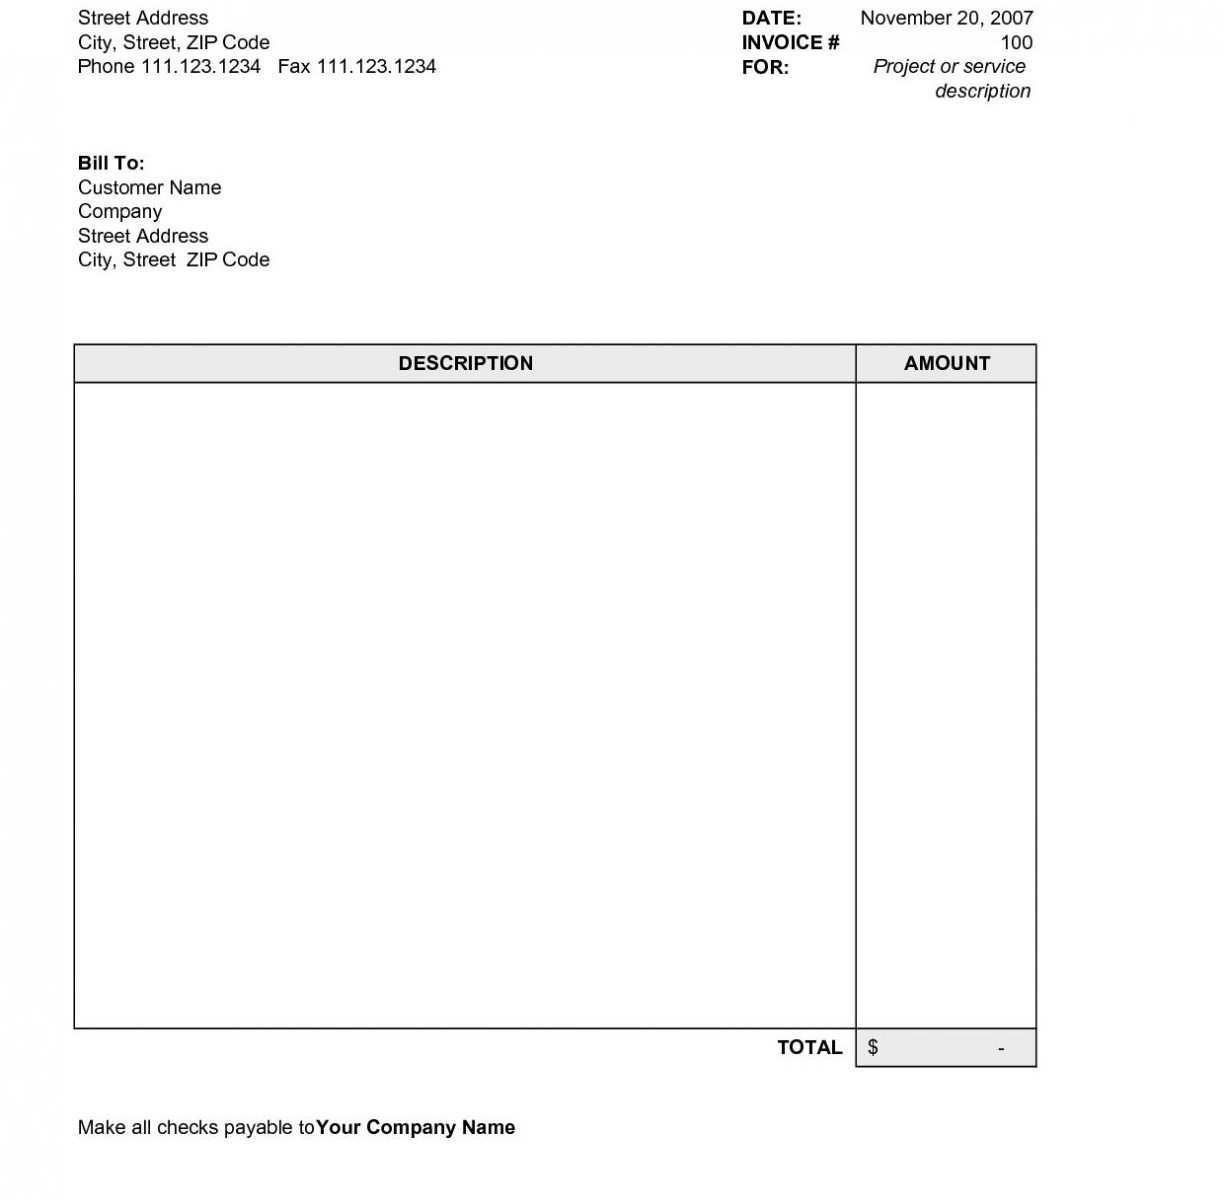 Blank Invoice Template Free from legaldbol.com